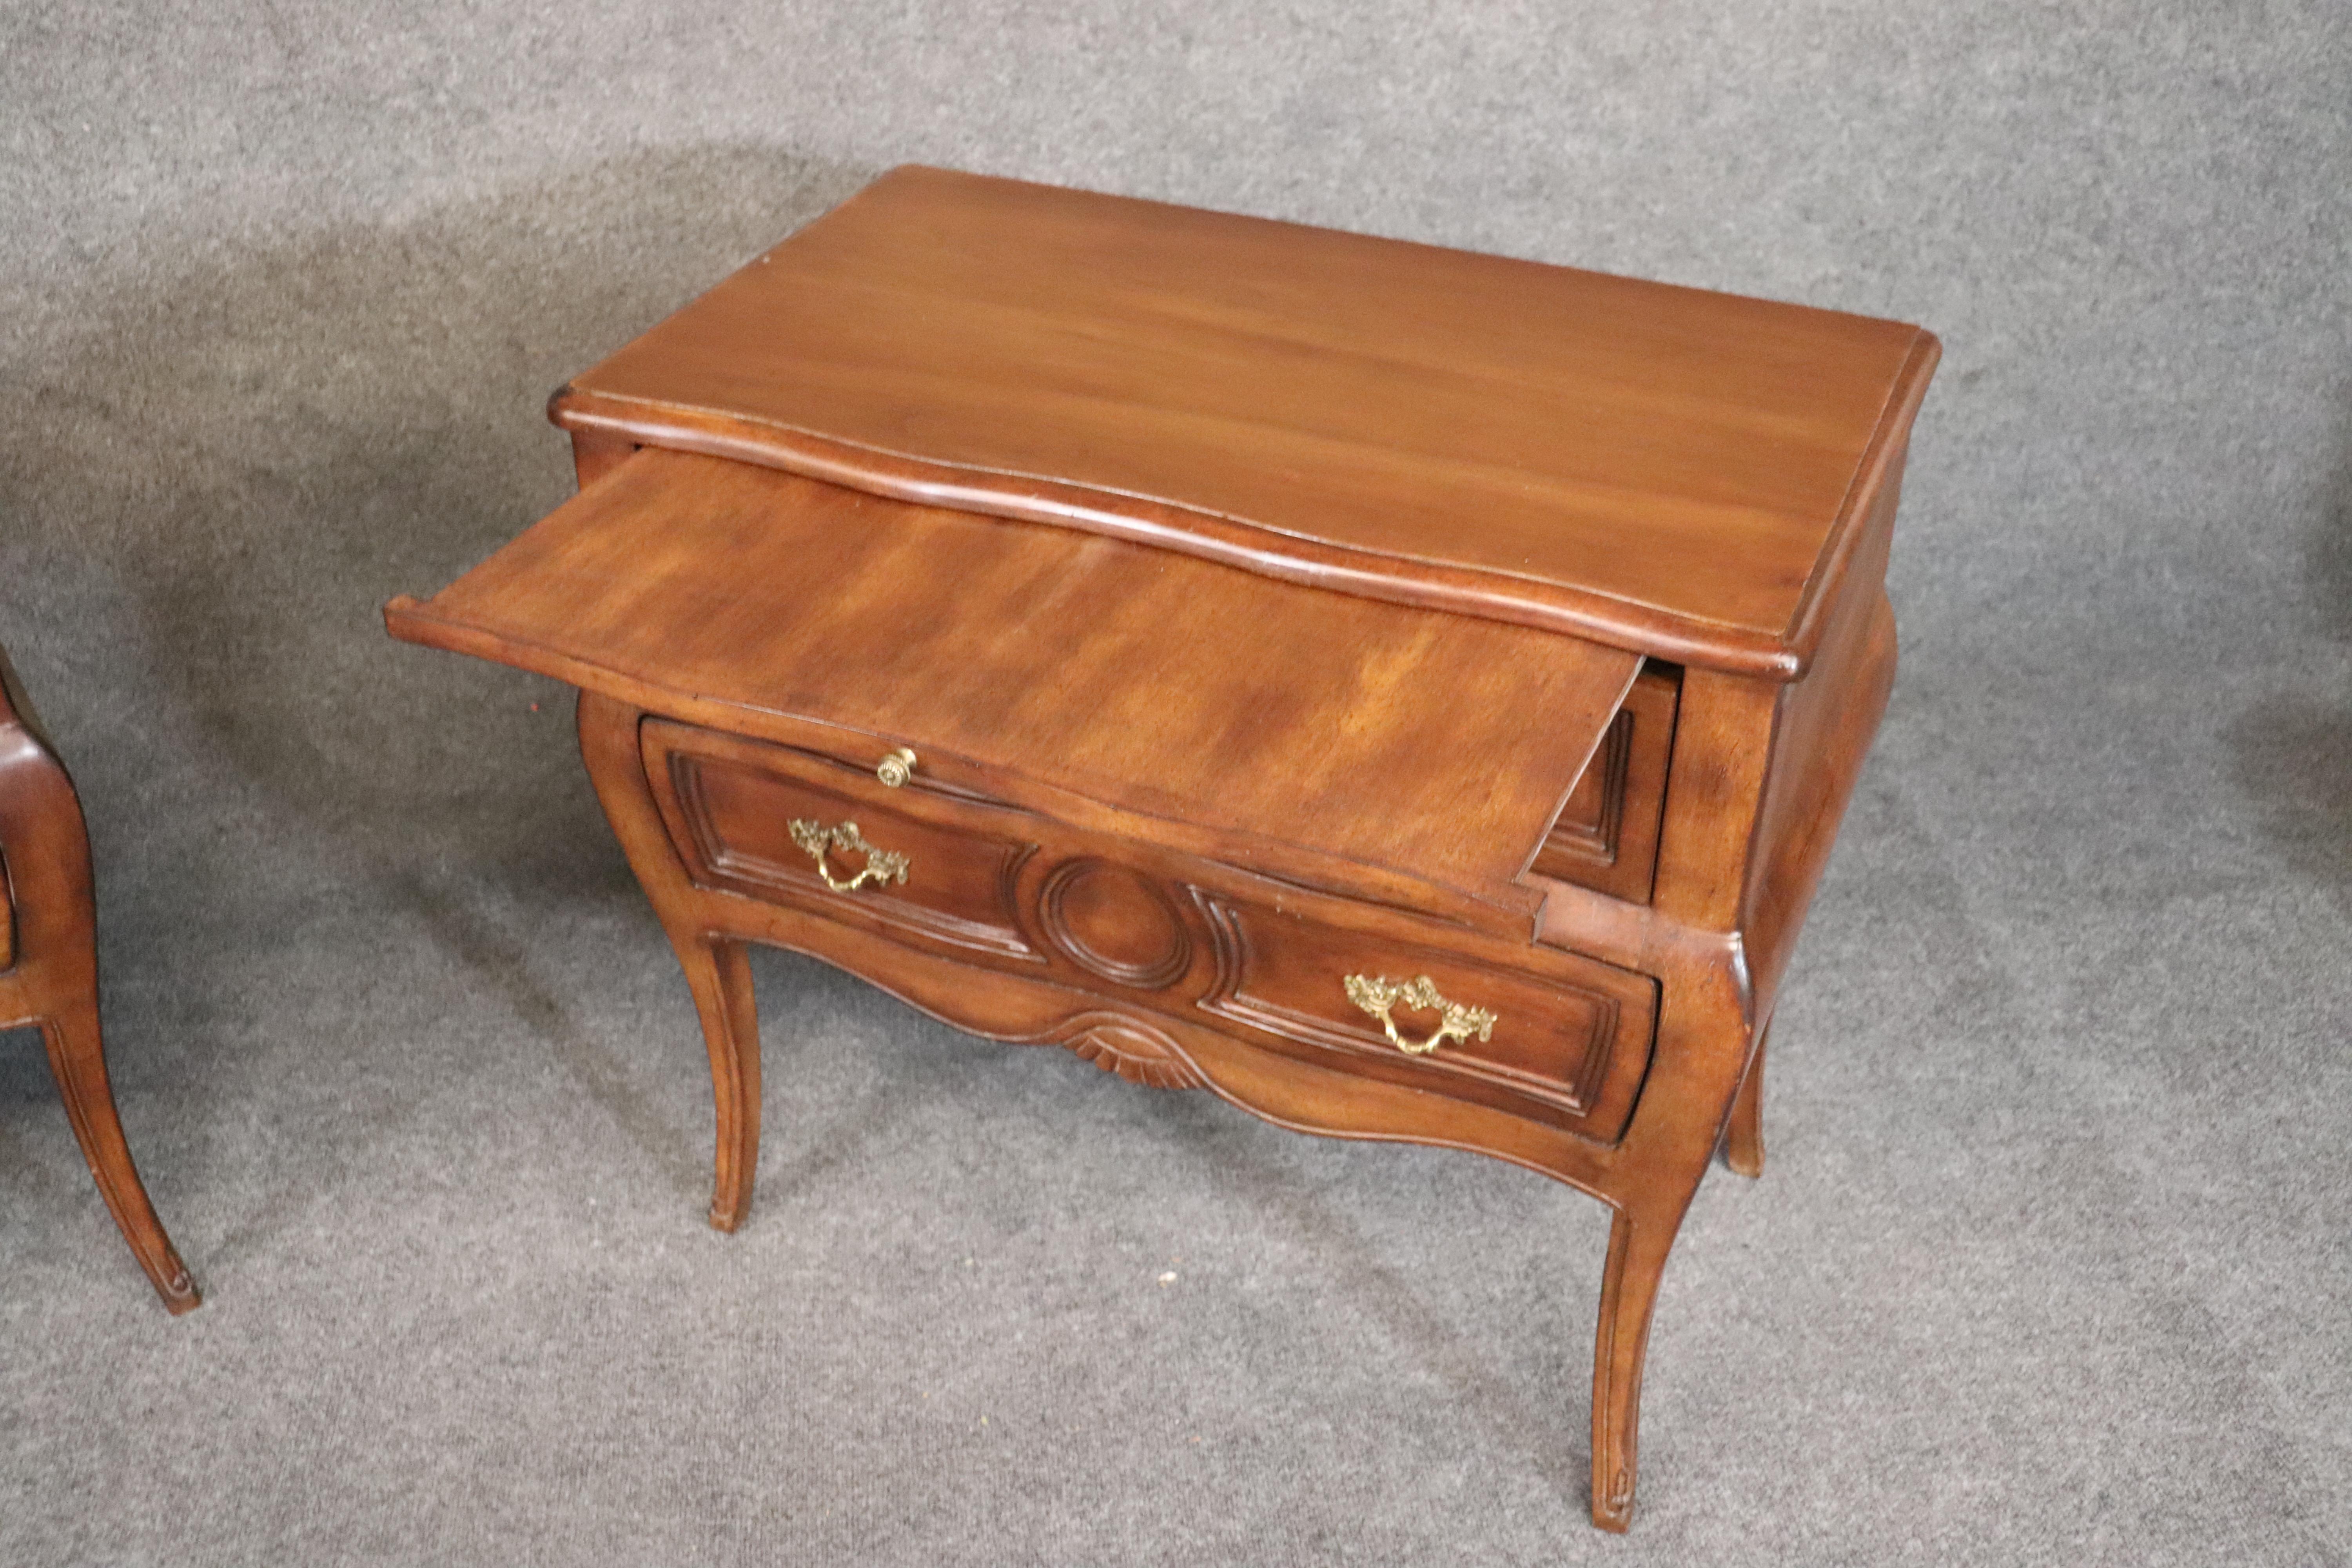 Mid-20th Century Italian Bombe Walnut Nightstands Commodes with Slide Out Trays circa 1950s, Pair